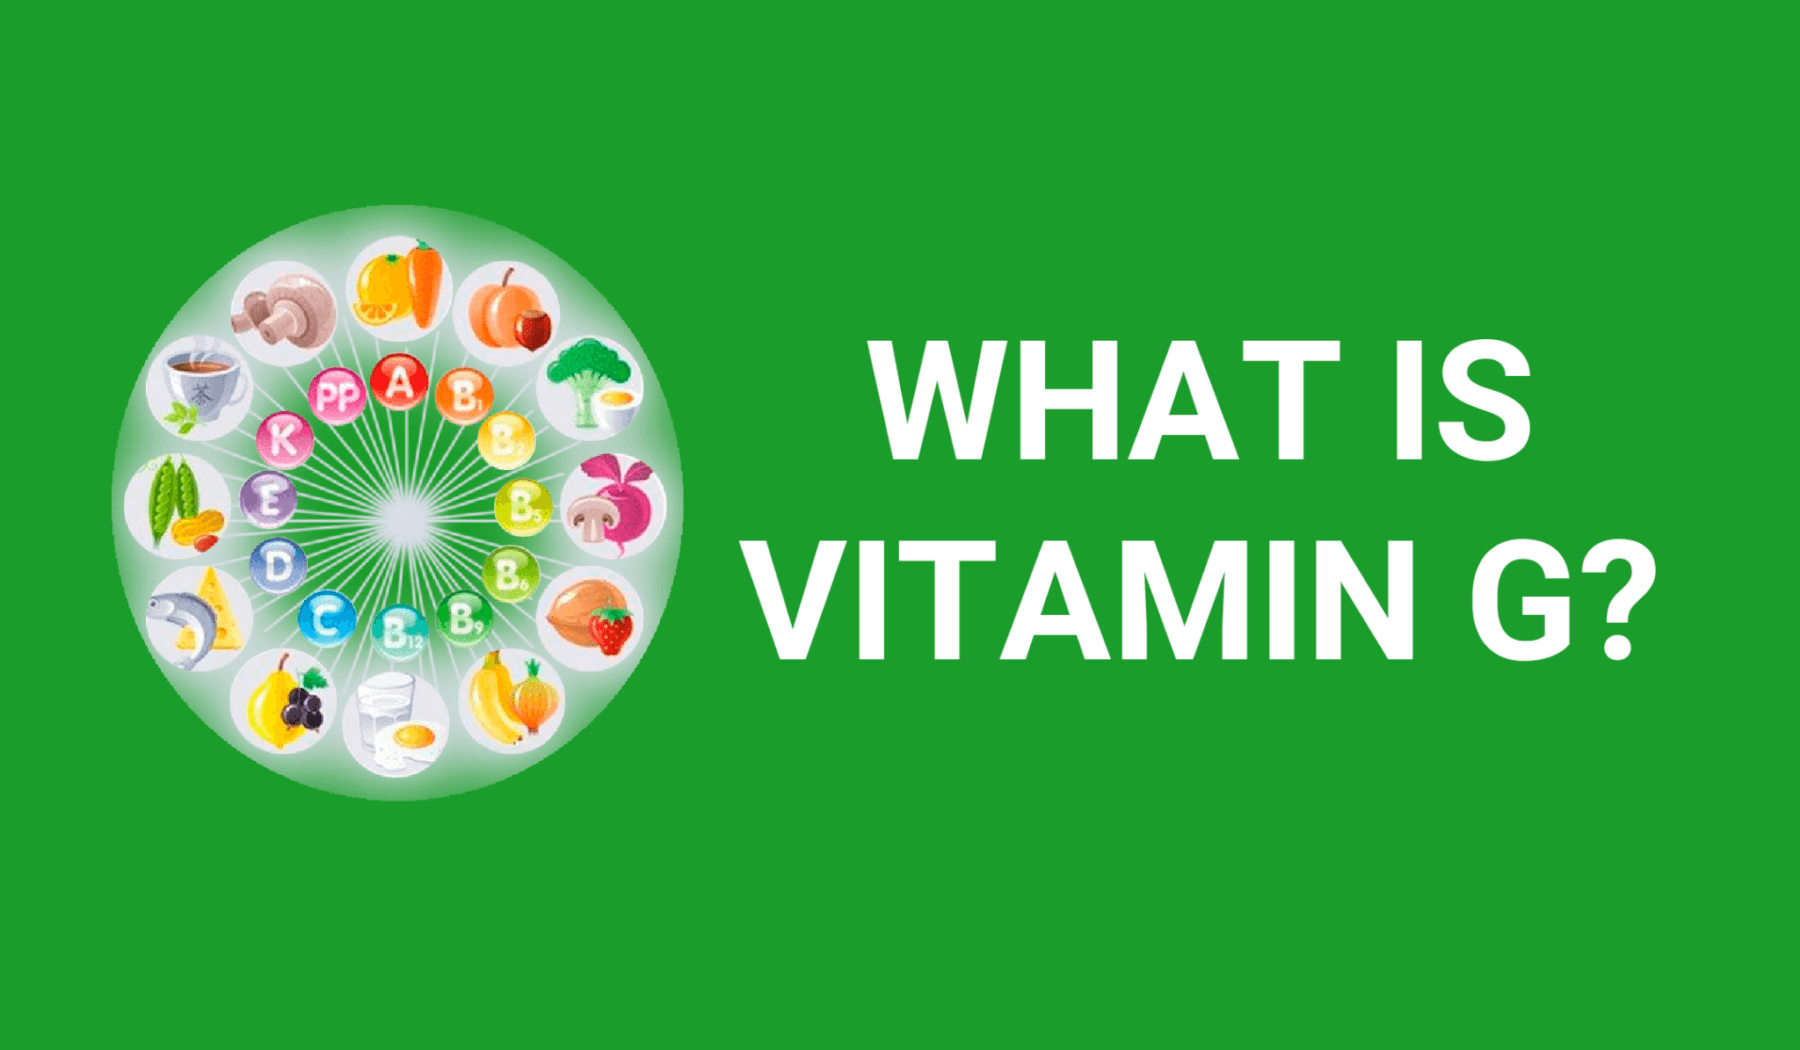 What is Vitamin G